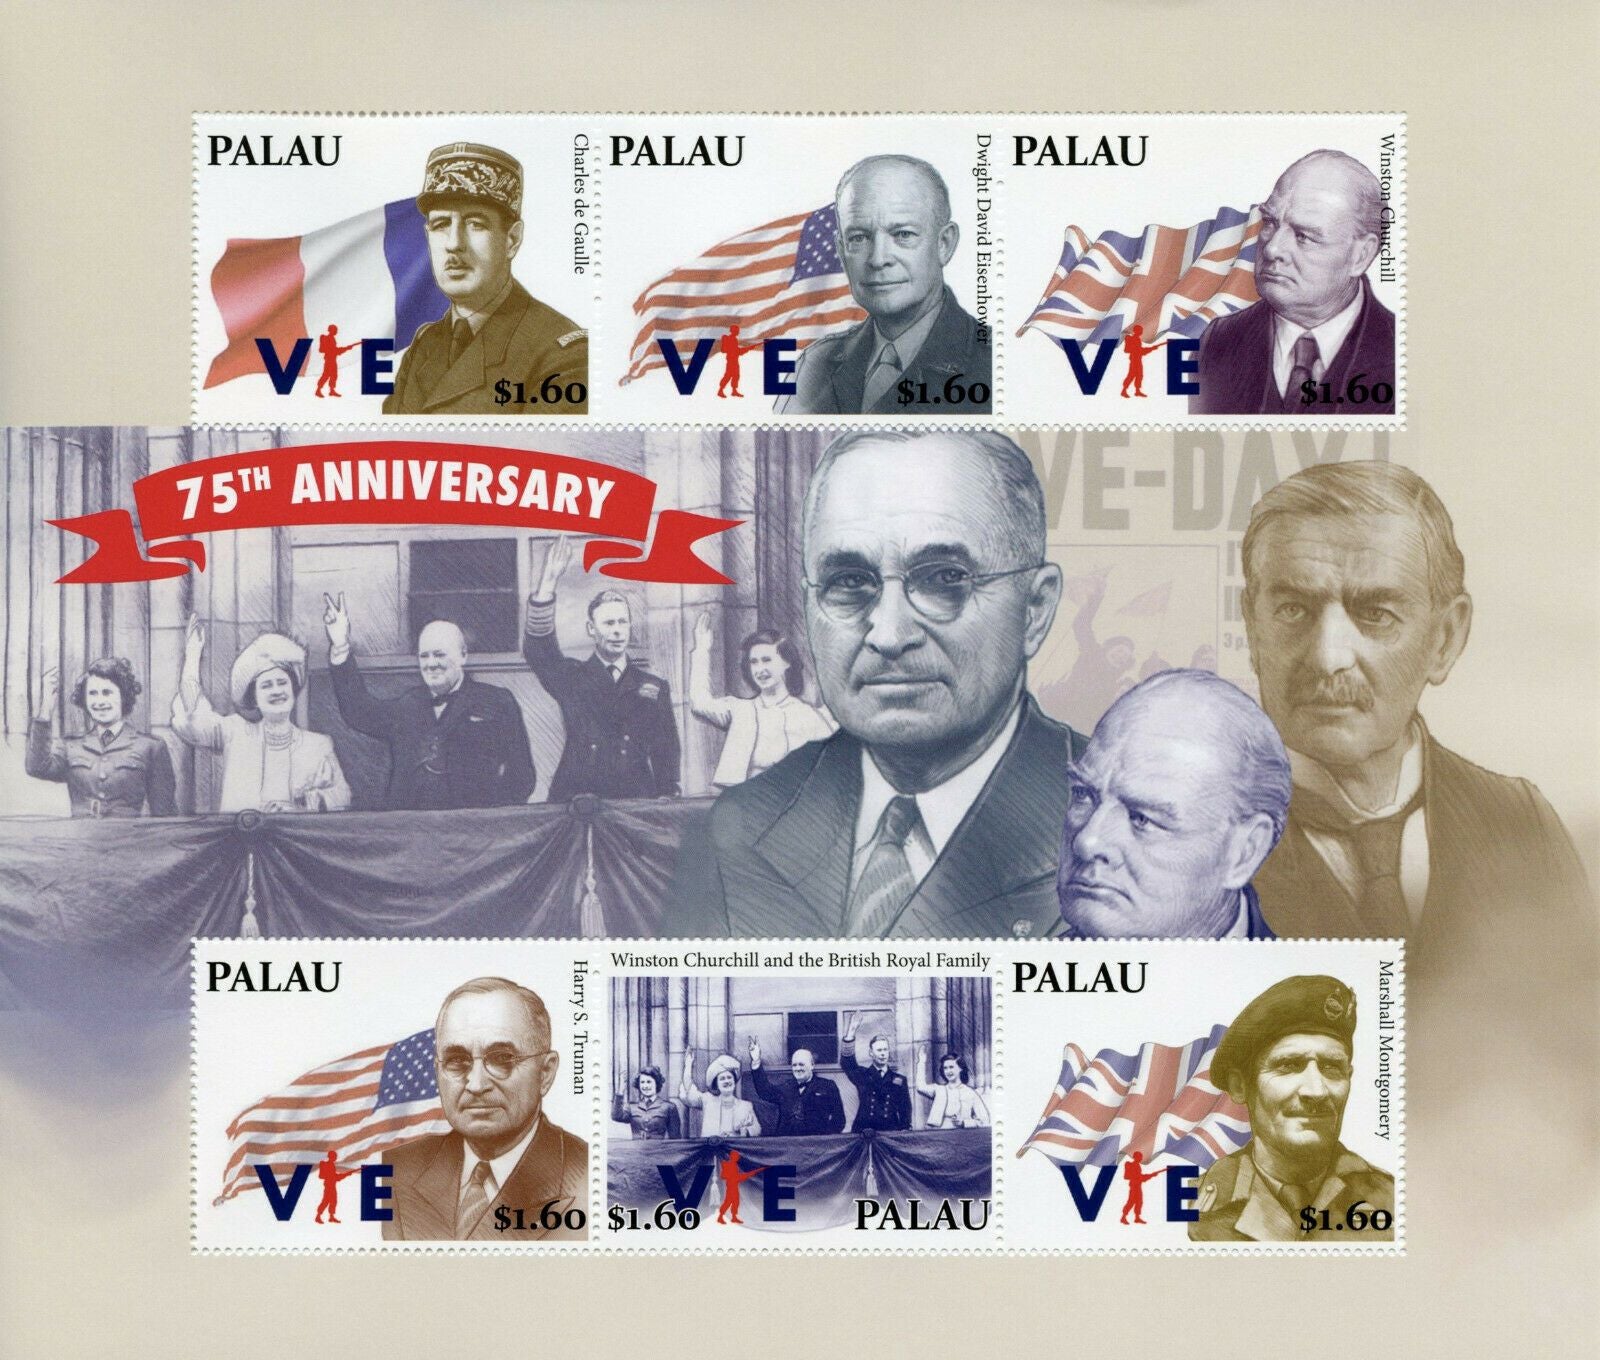 Palau 2020 MNH Military Stamps WWII WW2 VE Day Churchill De Gaulle Truman 6v MS